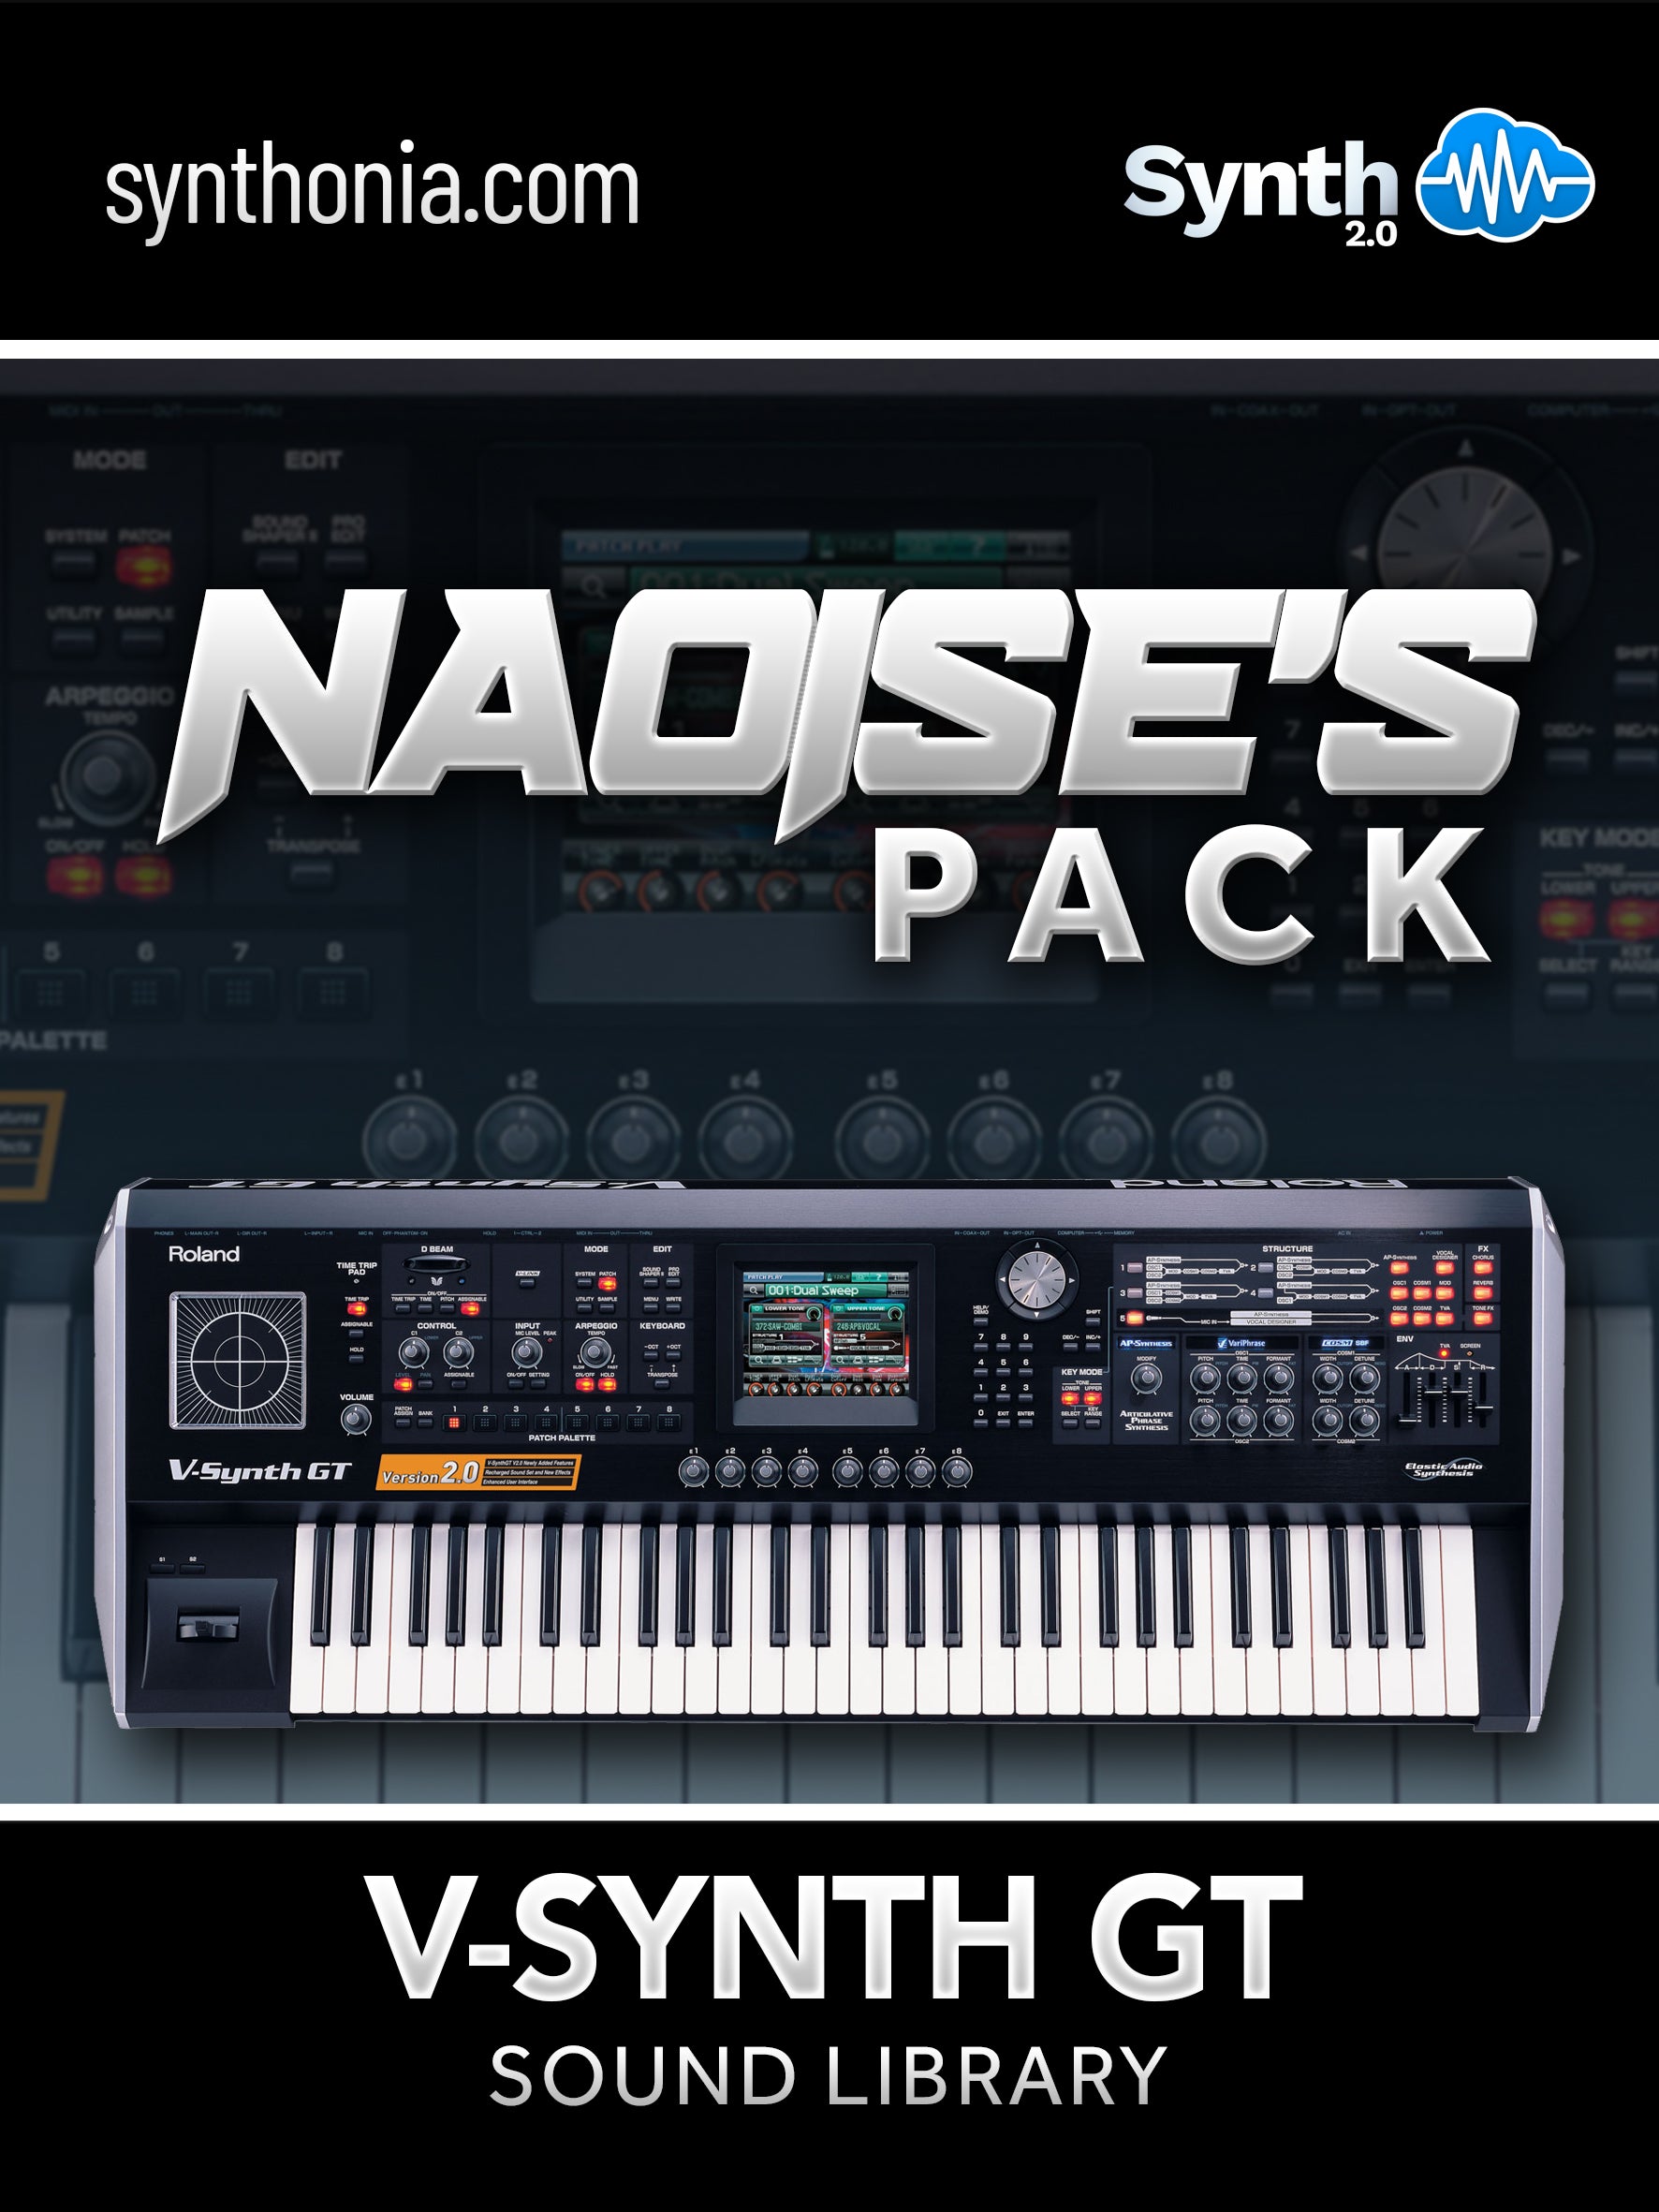 SCL096 - Naoise's Pack - V-Synth GT ( 29 presets )